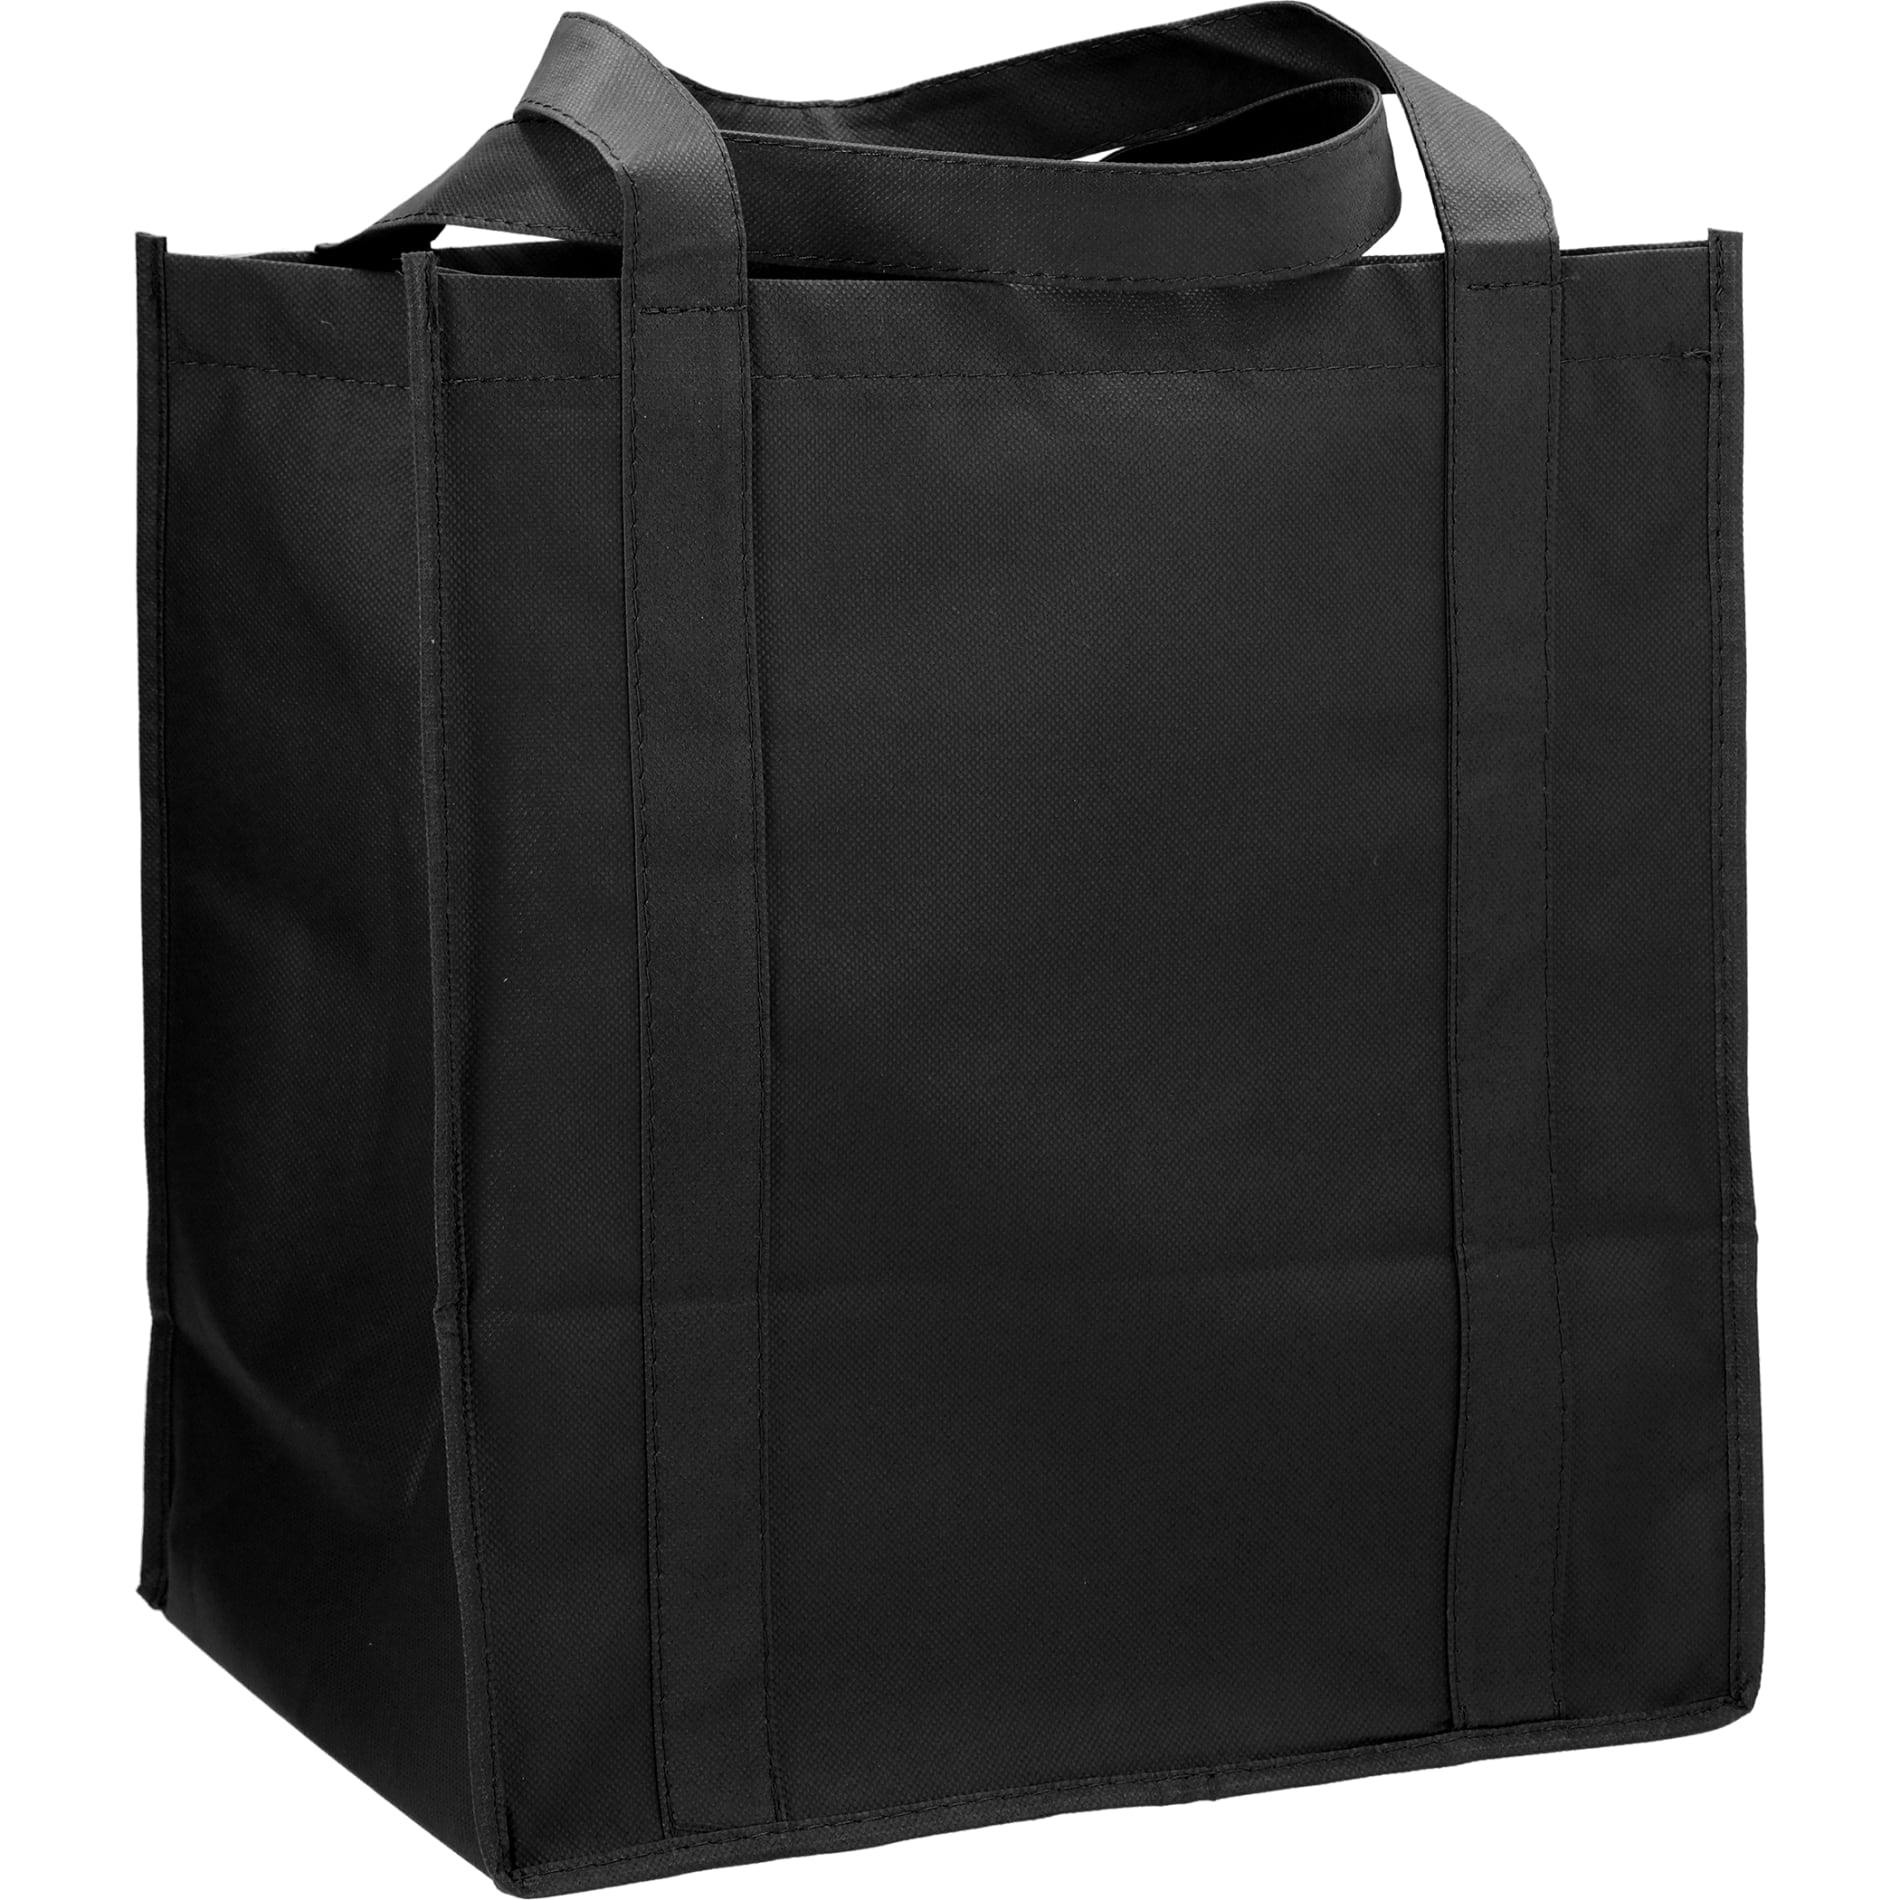 Hercules Non-Woven Grocery Tote - additional Image 2